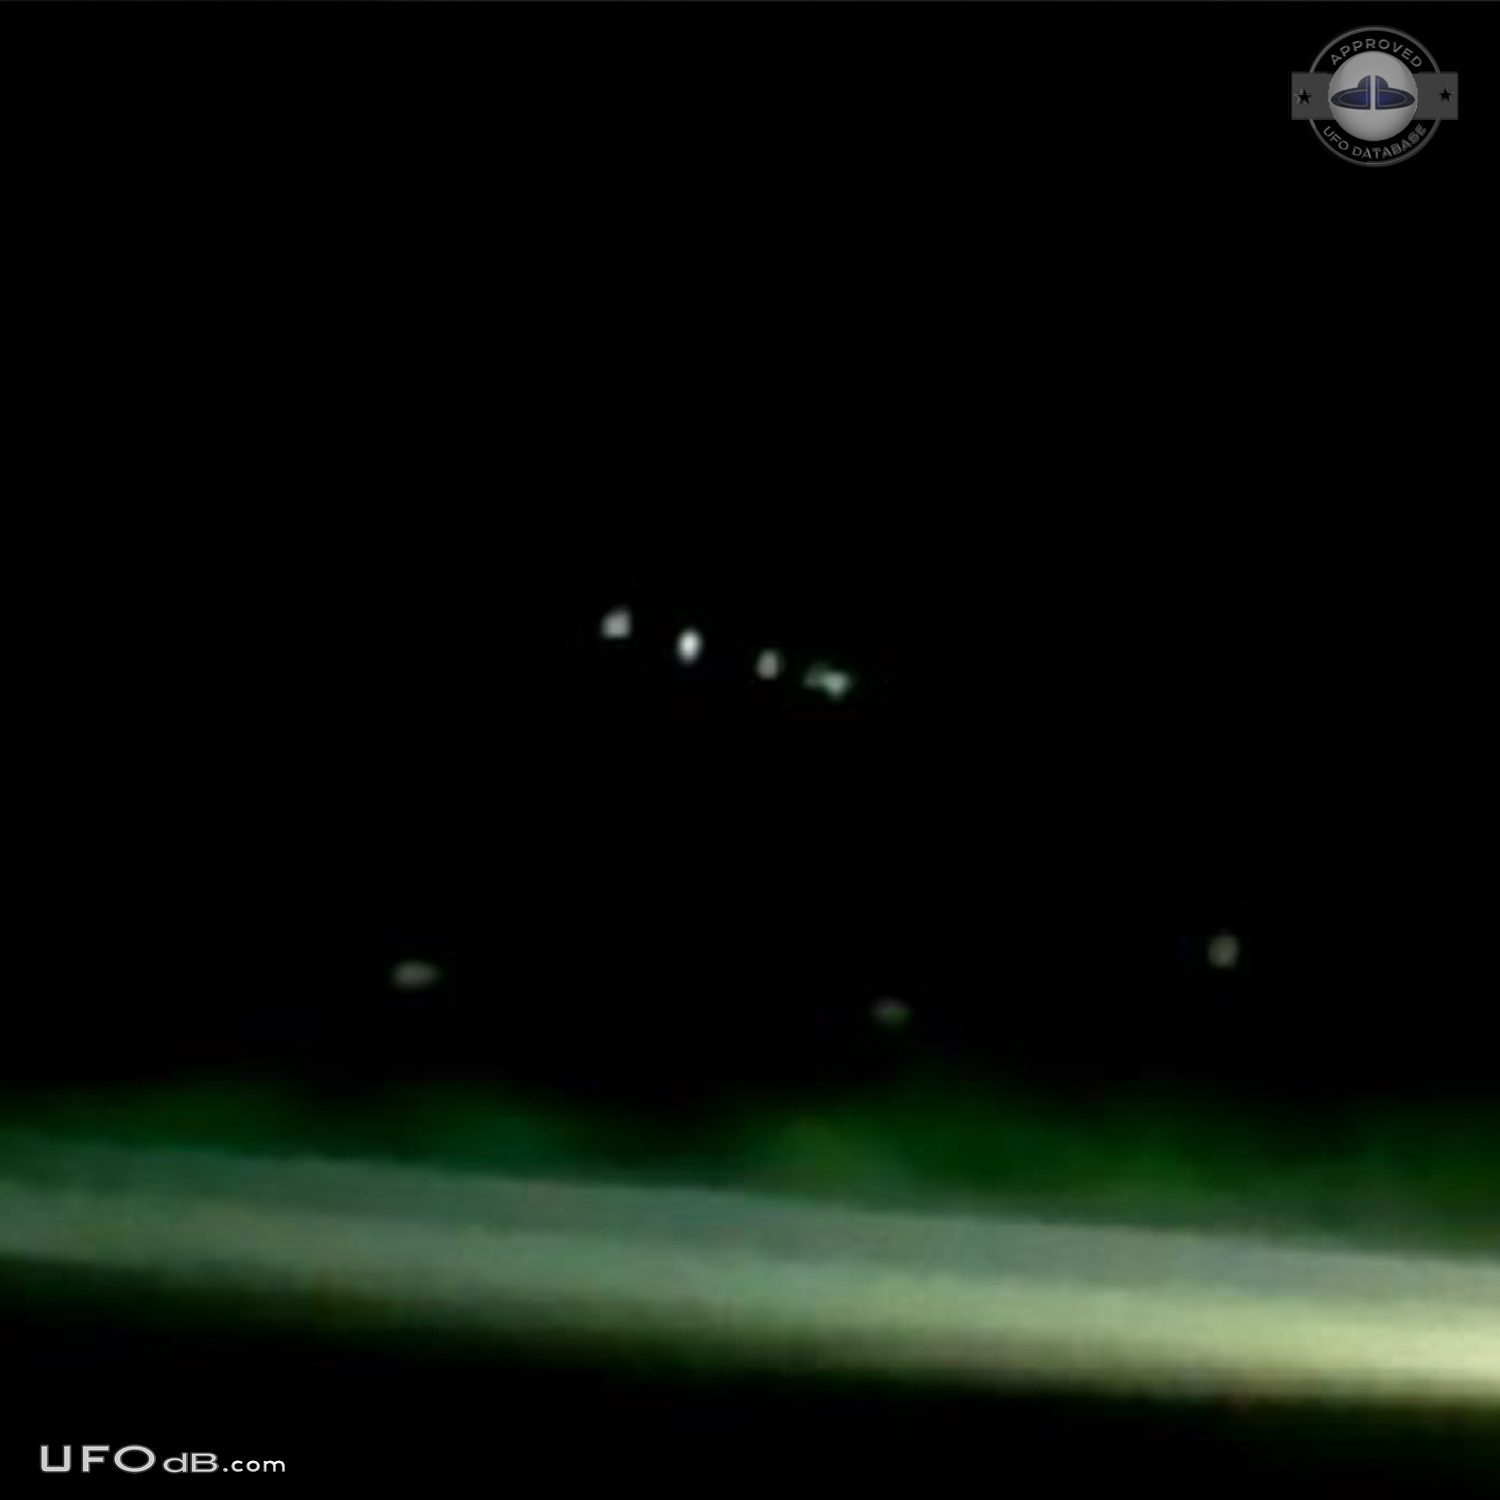 Fleet of 5 bright lights UFOs seen by many witnesses in Johannesburg UFO Picture #487-2